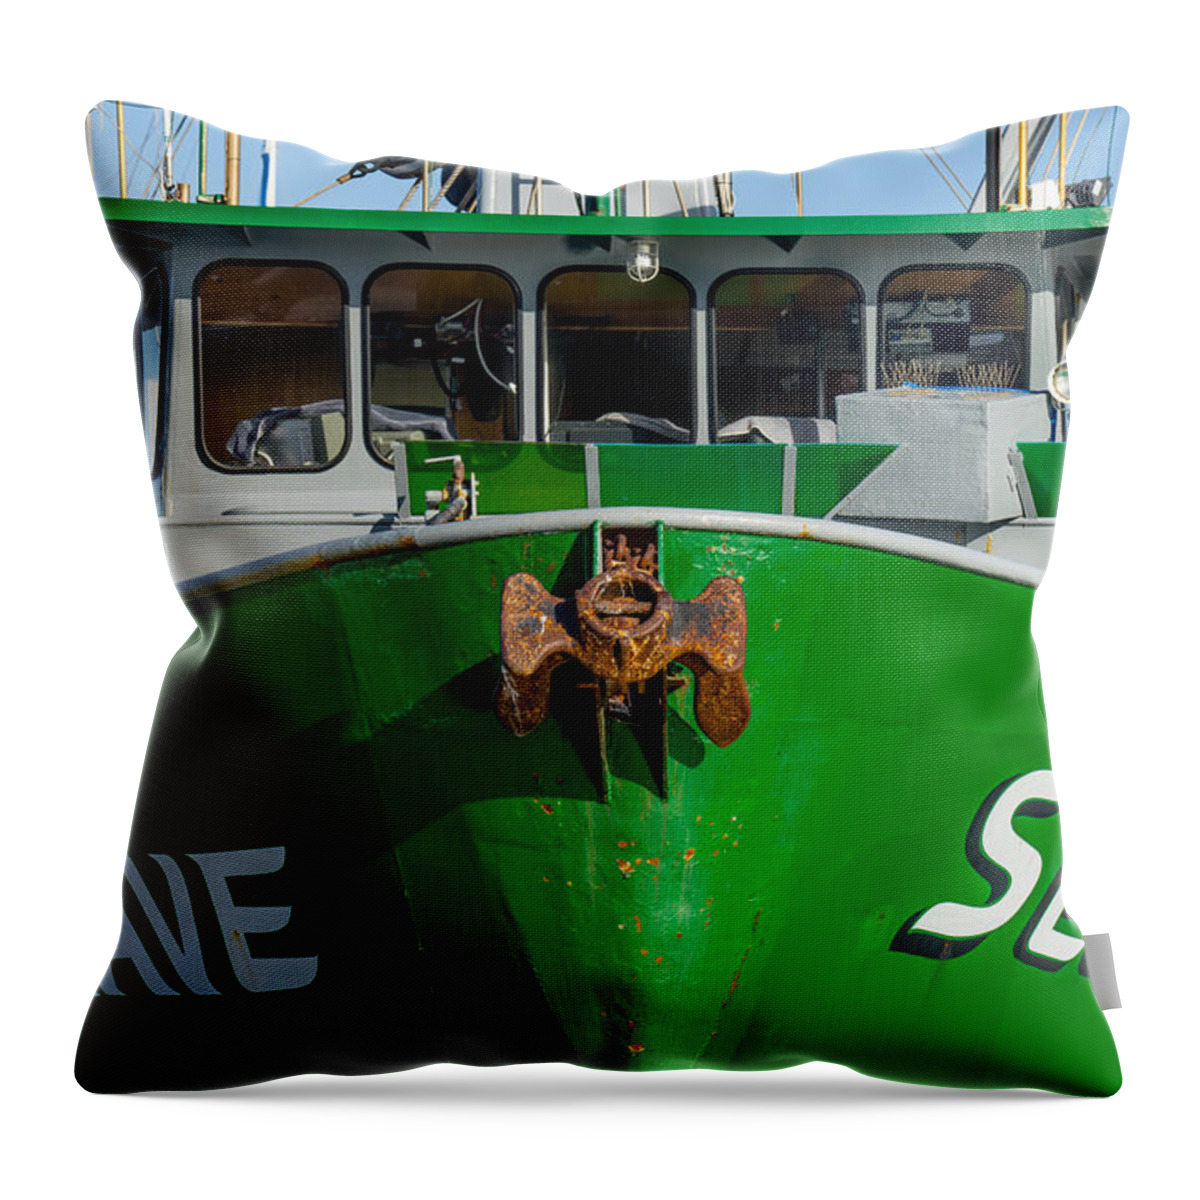 Boats Throw Pillow featuring the photograph Sea Wave by Derek Dean